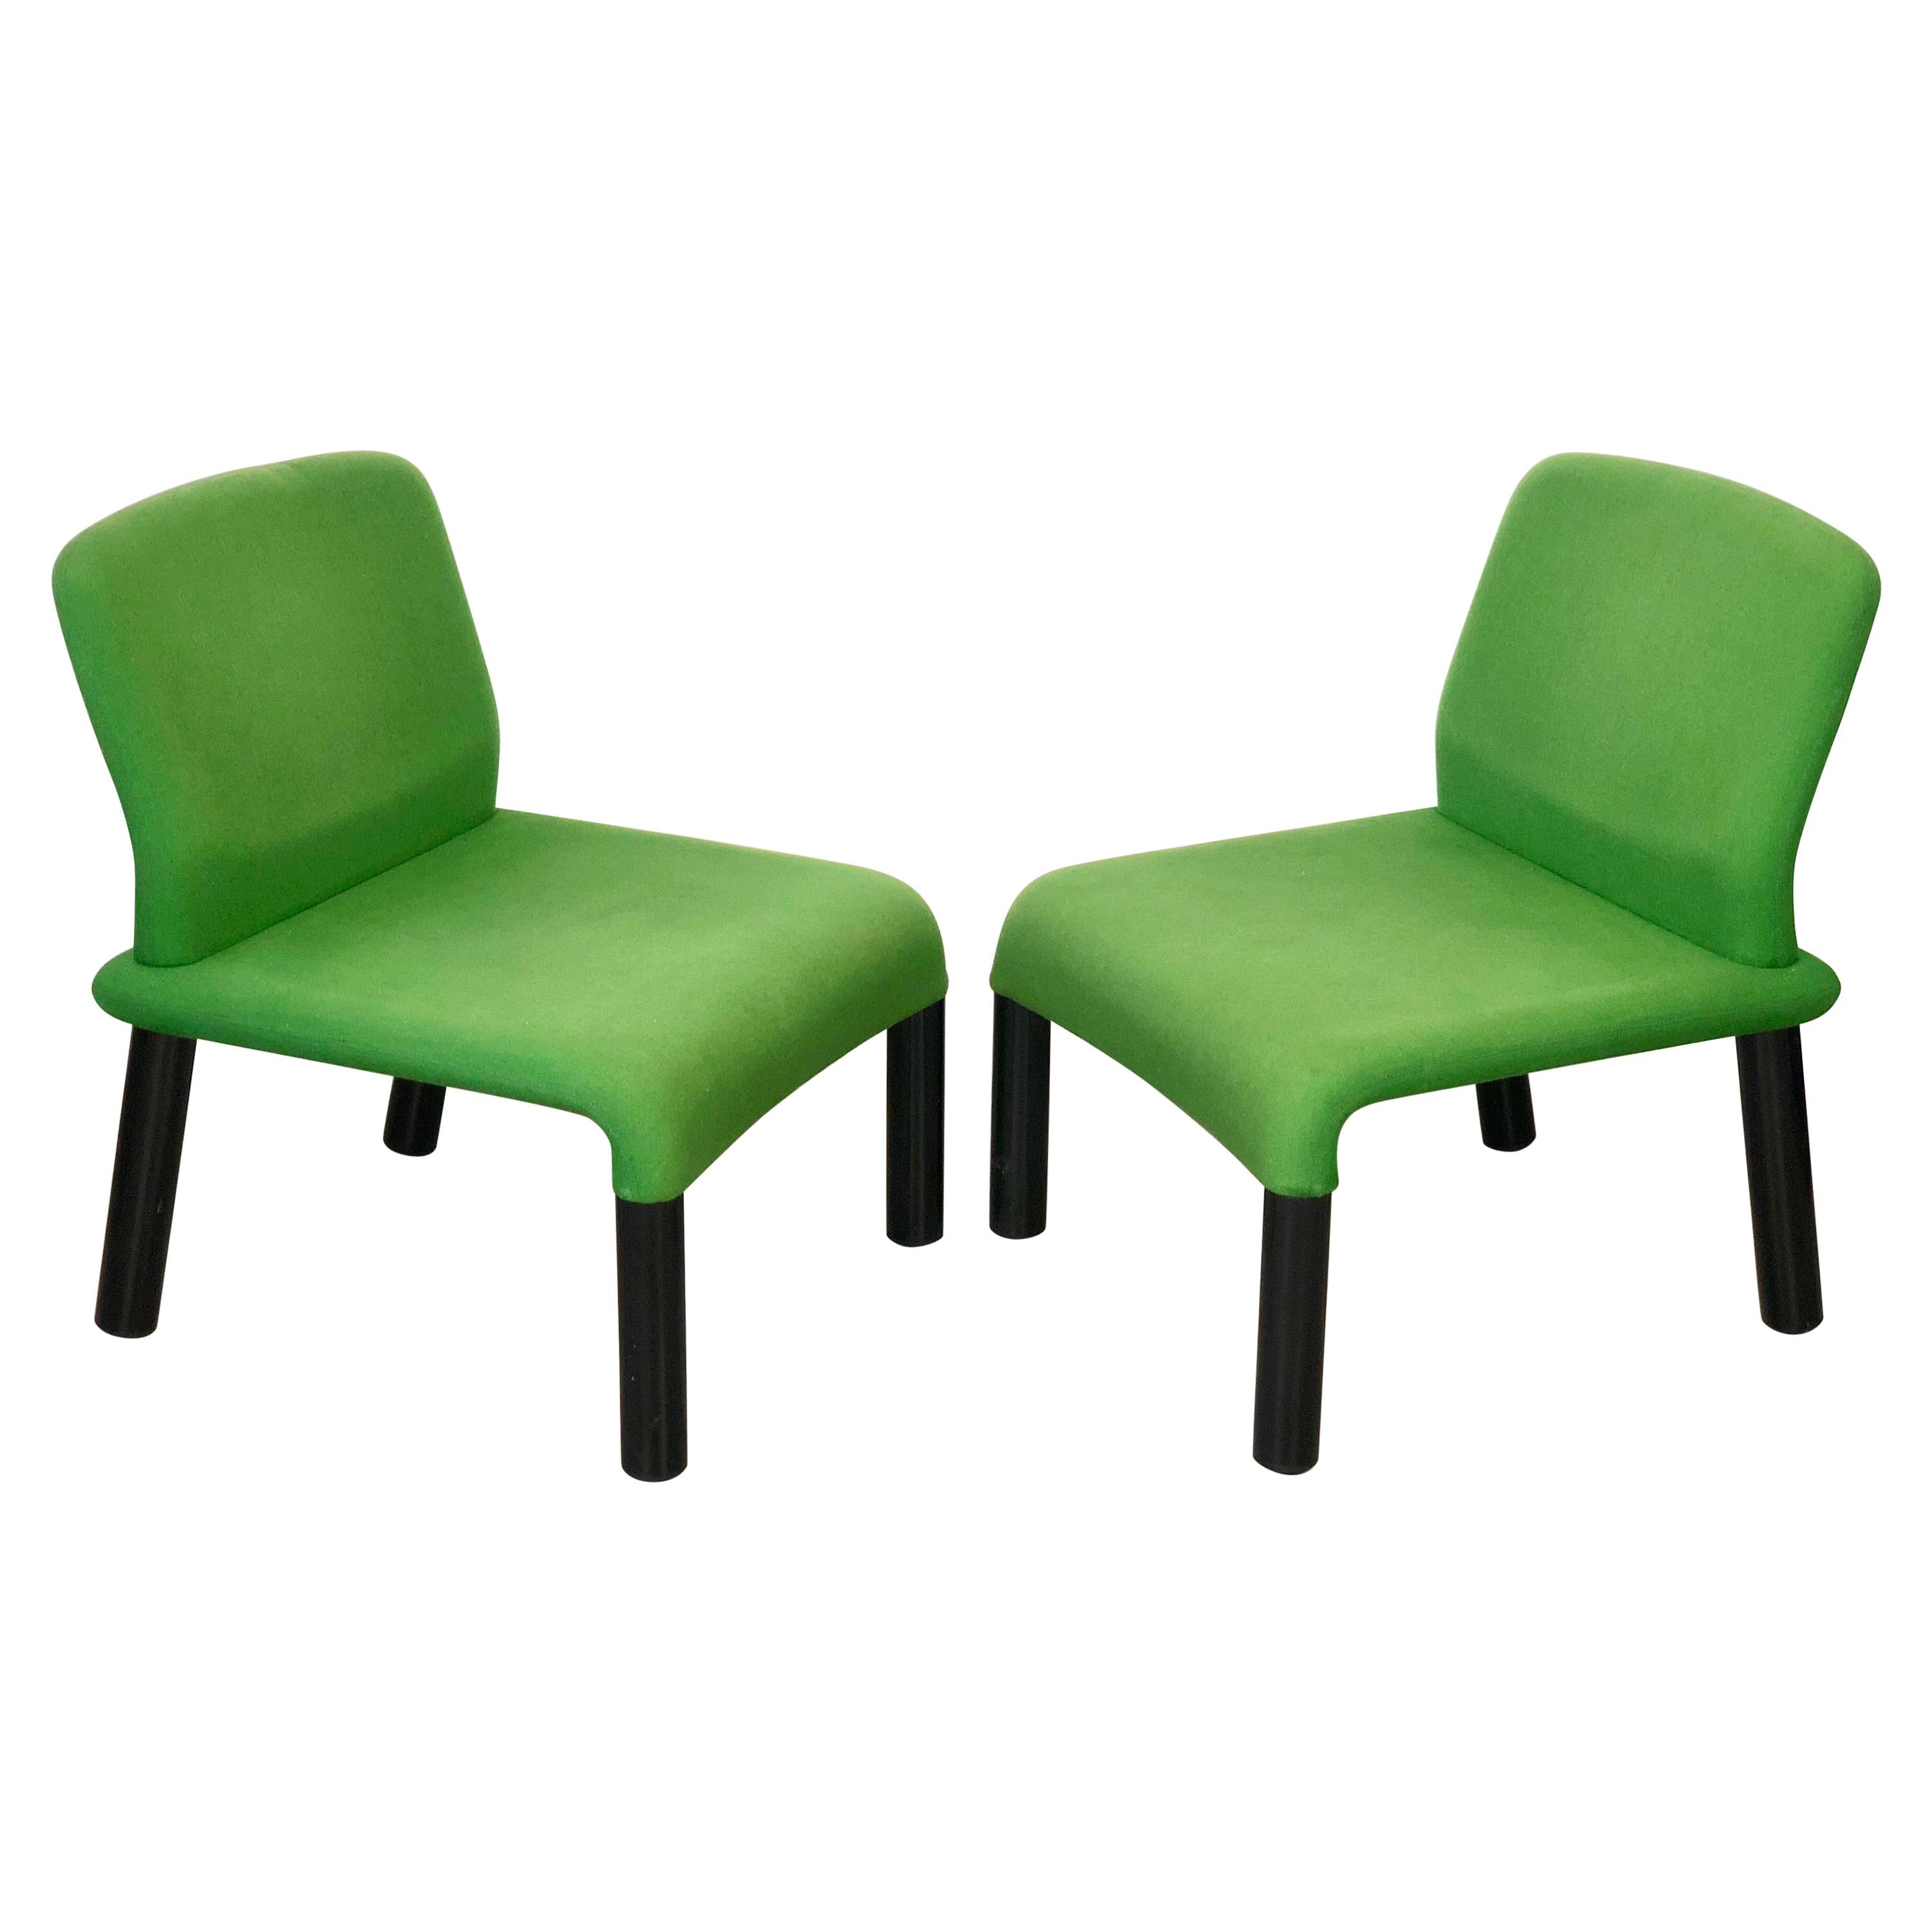 Pair of Green Armchair in Plastic Fabric, Italy, 1970s For Sale